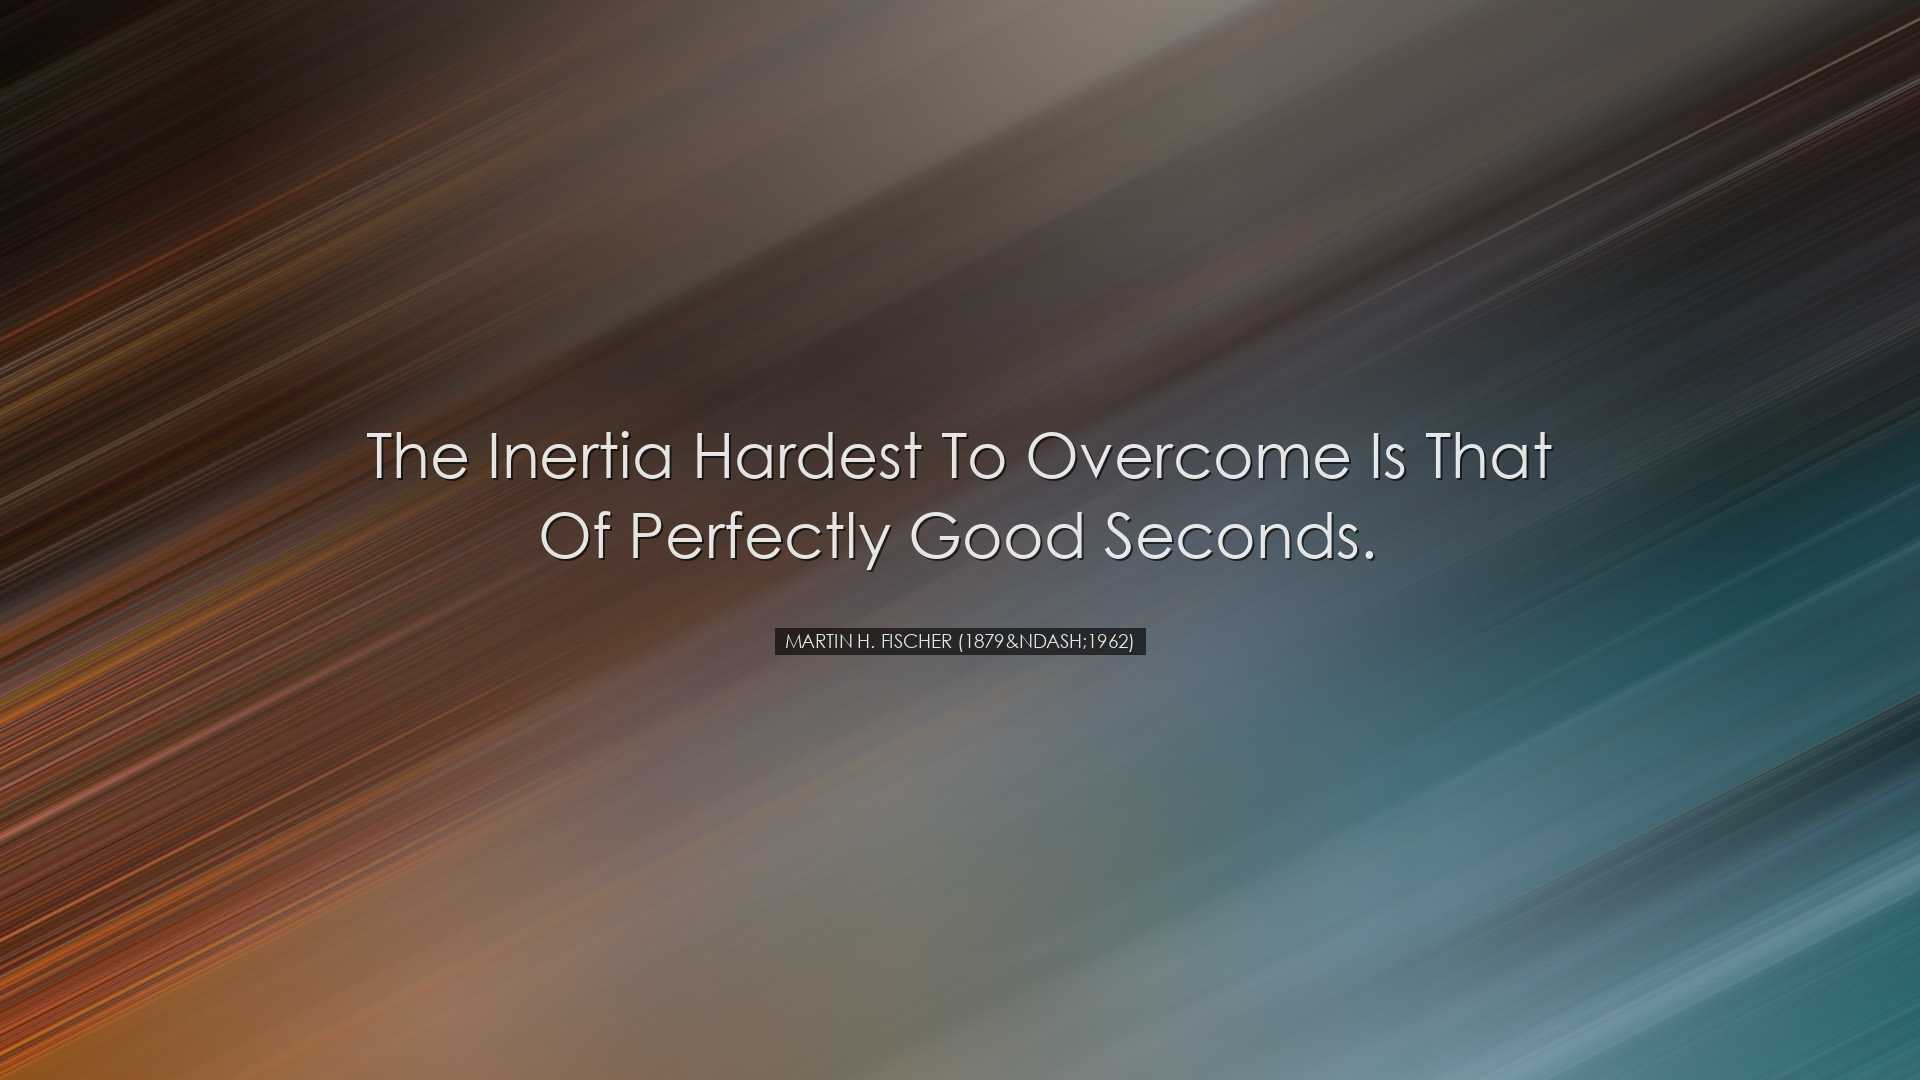 The inertia hardest to overcome is that of perfectly good seconds.